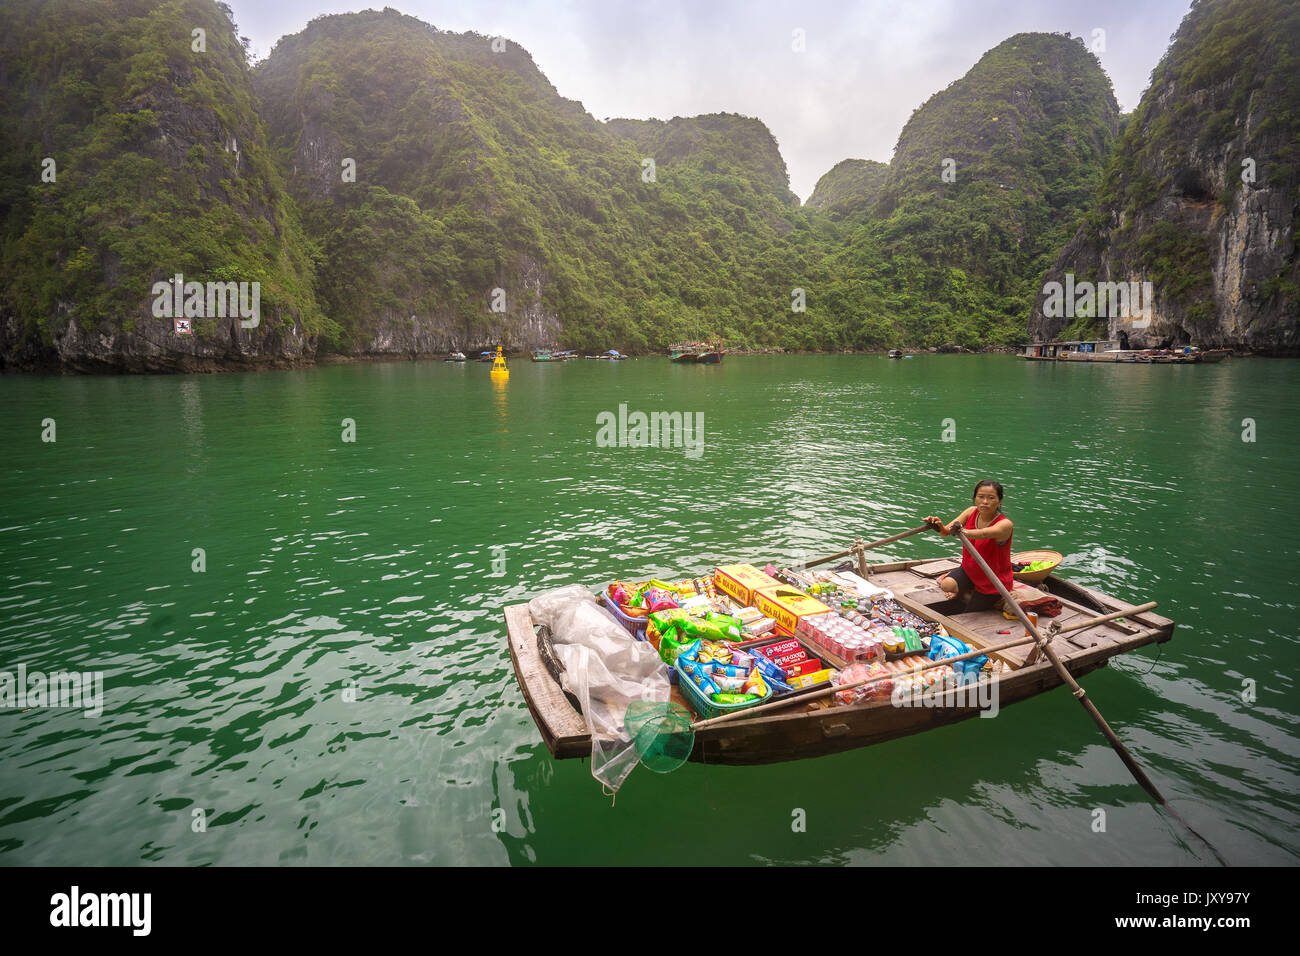 traditional vietnamese boat vendor selling products on a junk boat in Halong Bay, Vietnam Stock Photo